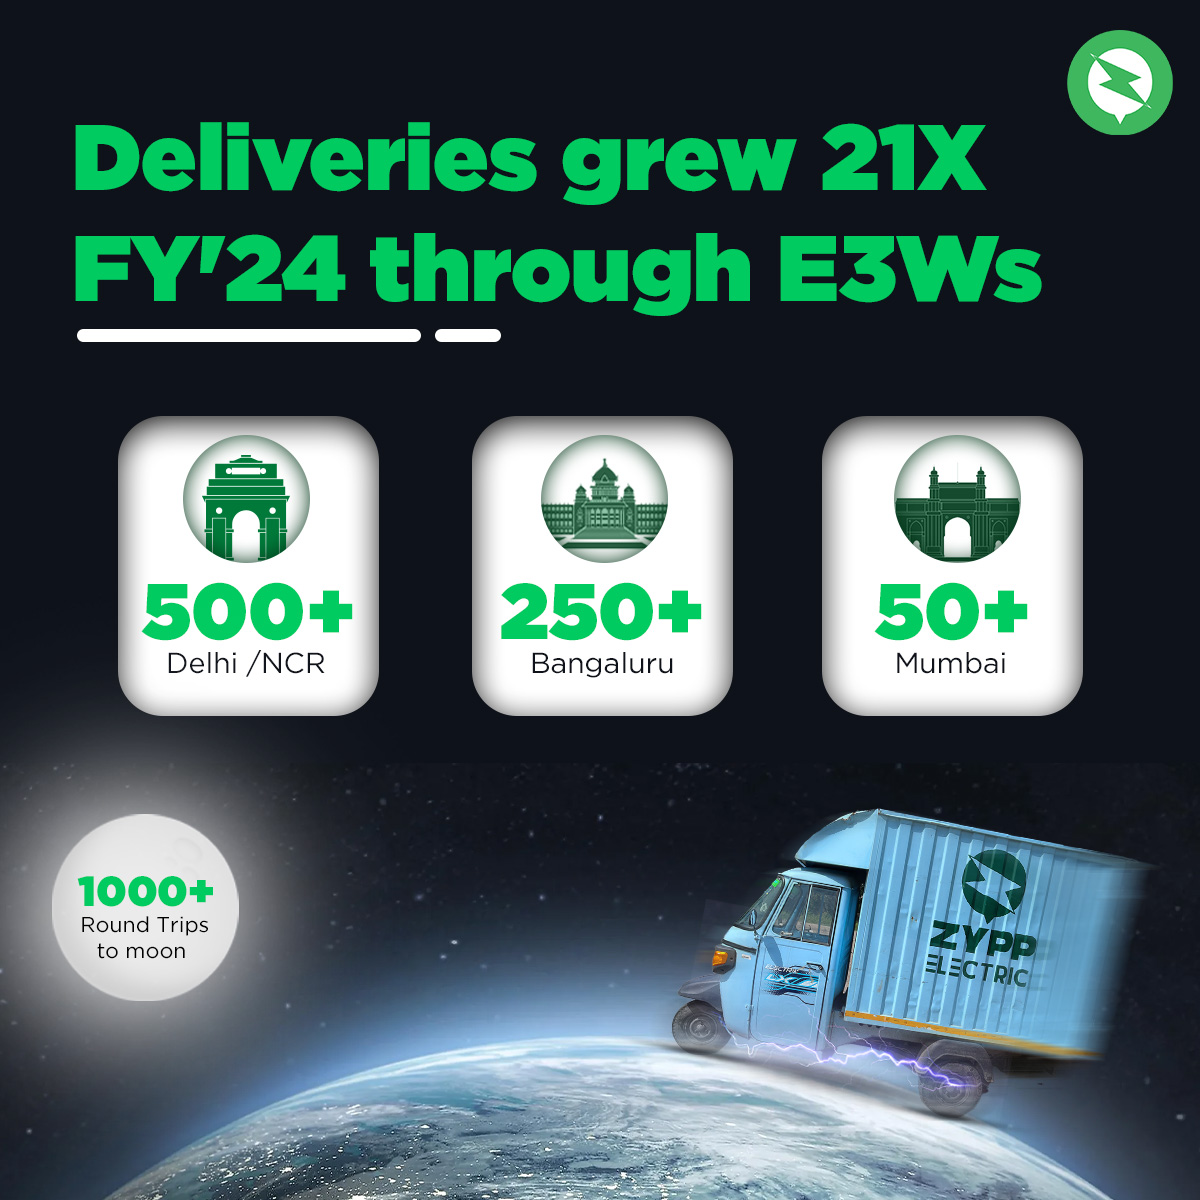 Sustainability is not just E2Ws for us, E3Ws are the next big thing at Zypp Electric. #sustainability #deliveries #L5 #logistics